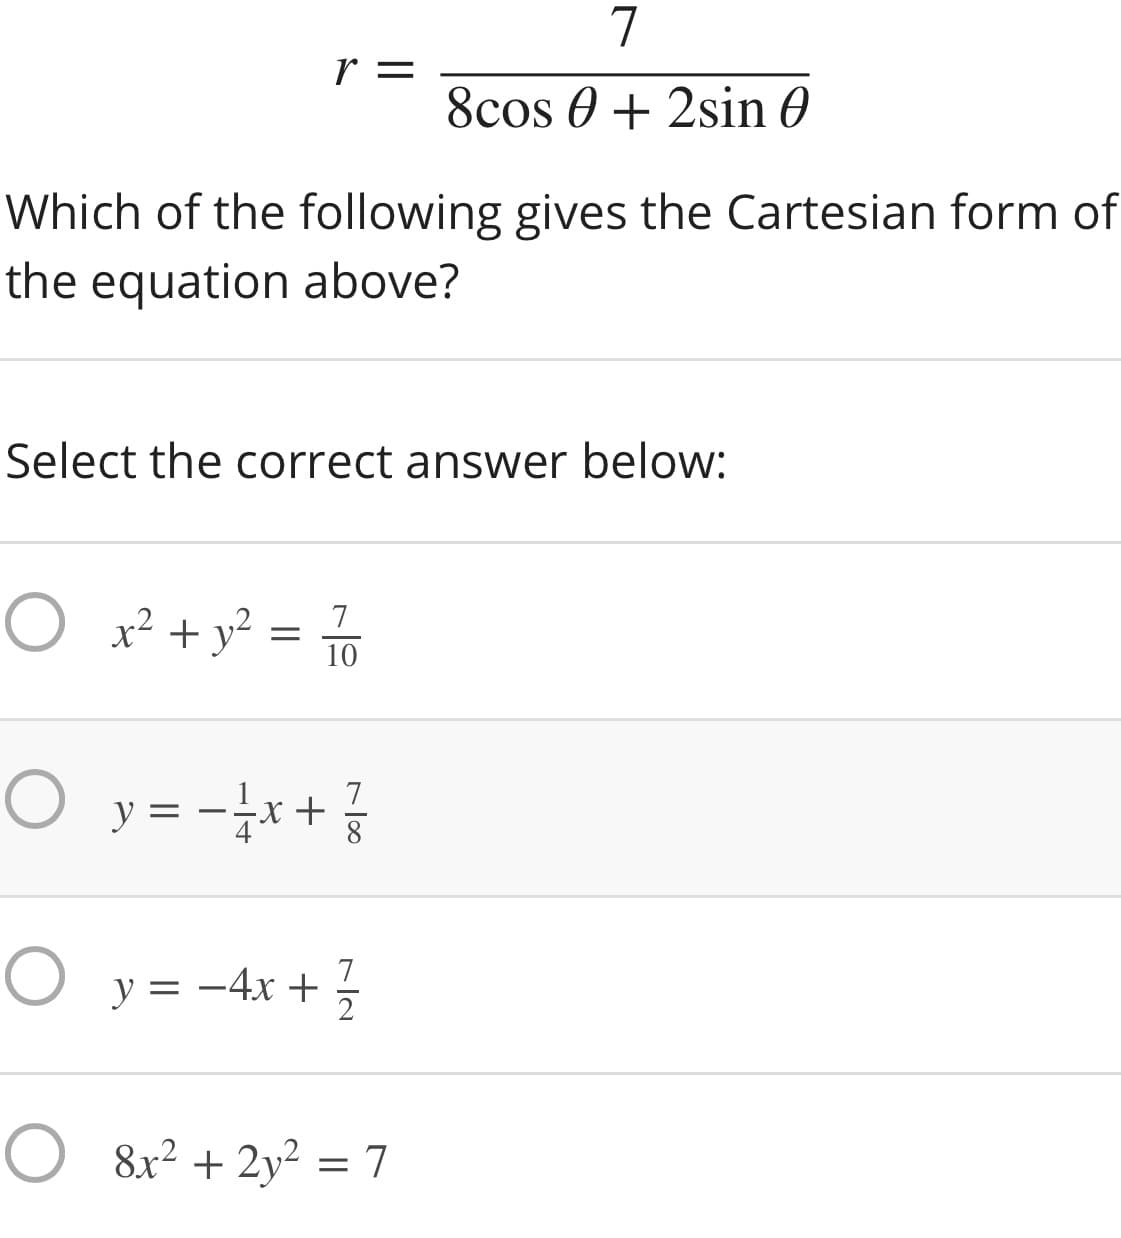 7
r =
8cos 0 + 2sin 0
Which of the following gives the Cartesian form of
the equation above?
Select the correct answer below:
O x² + y? =
7
10
O y = -x+
7
8
O y = -4x+5
7
2
O 8x? + 2y²
= 7
